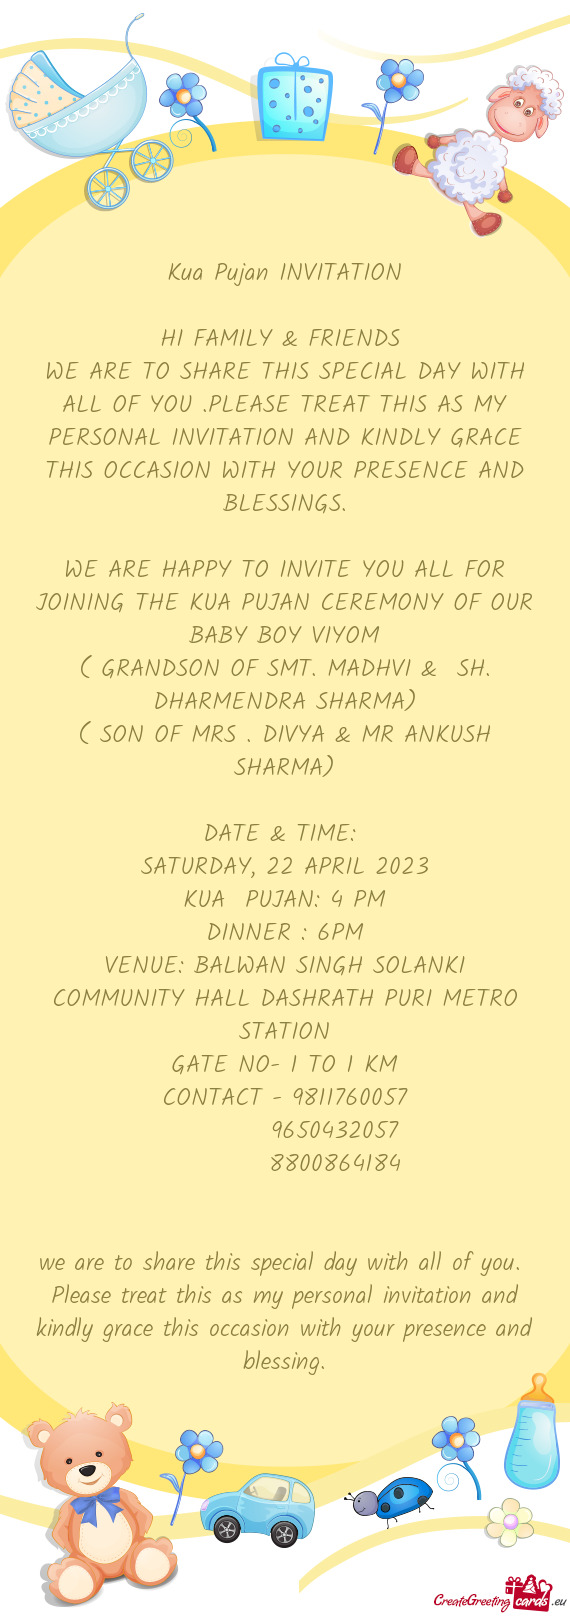 WE ARE TO SHARE THIS SPECIAL DAY WITH ALL OF YOU .PLEASE TREAT THIS AS MY PERSONAL INVITATION AND KI